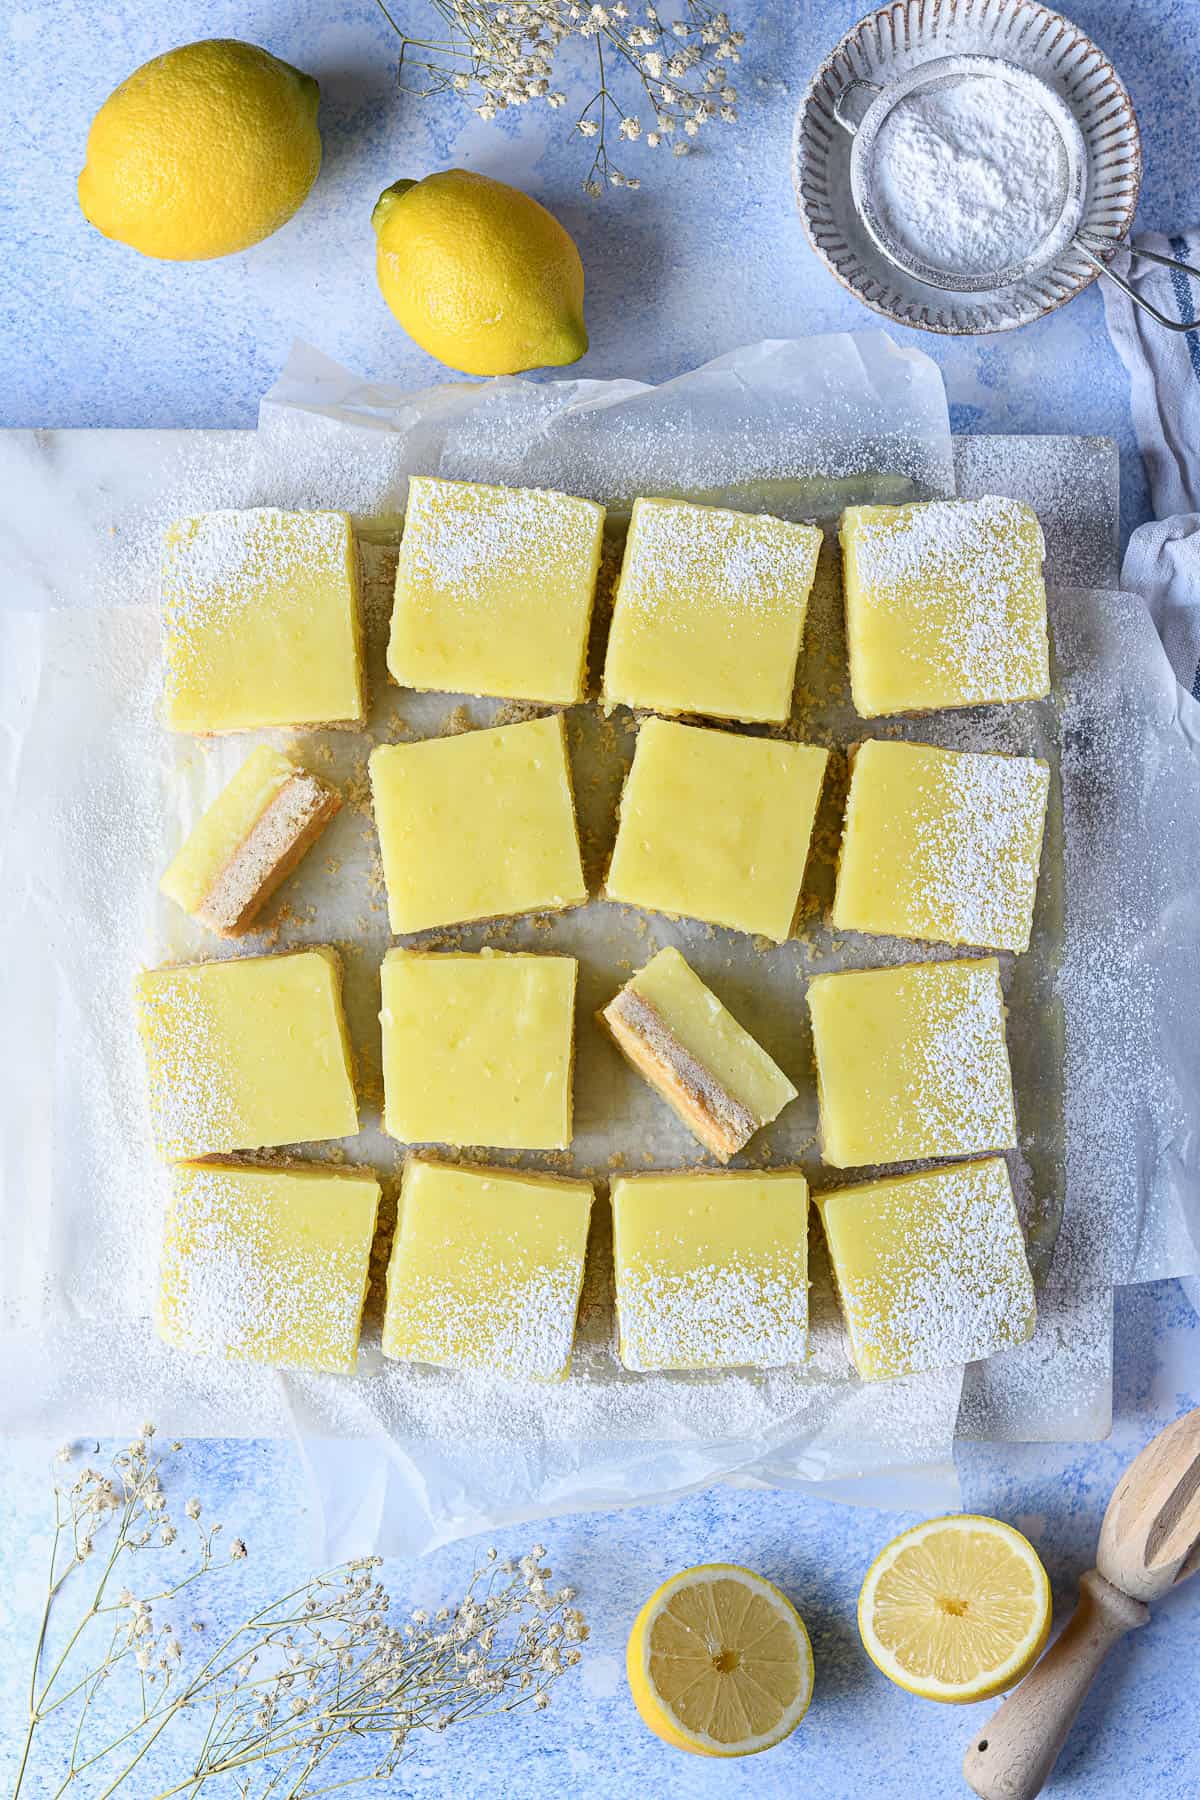 Vegan lemon bars on a blue surface with fresh lemons, a bowl of icing sugar and dried flowers.